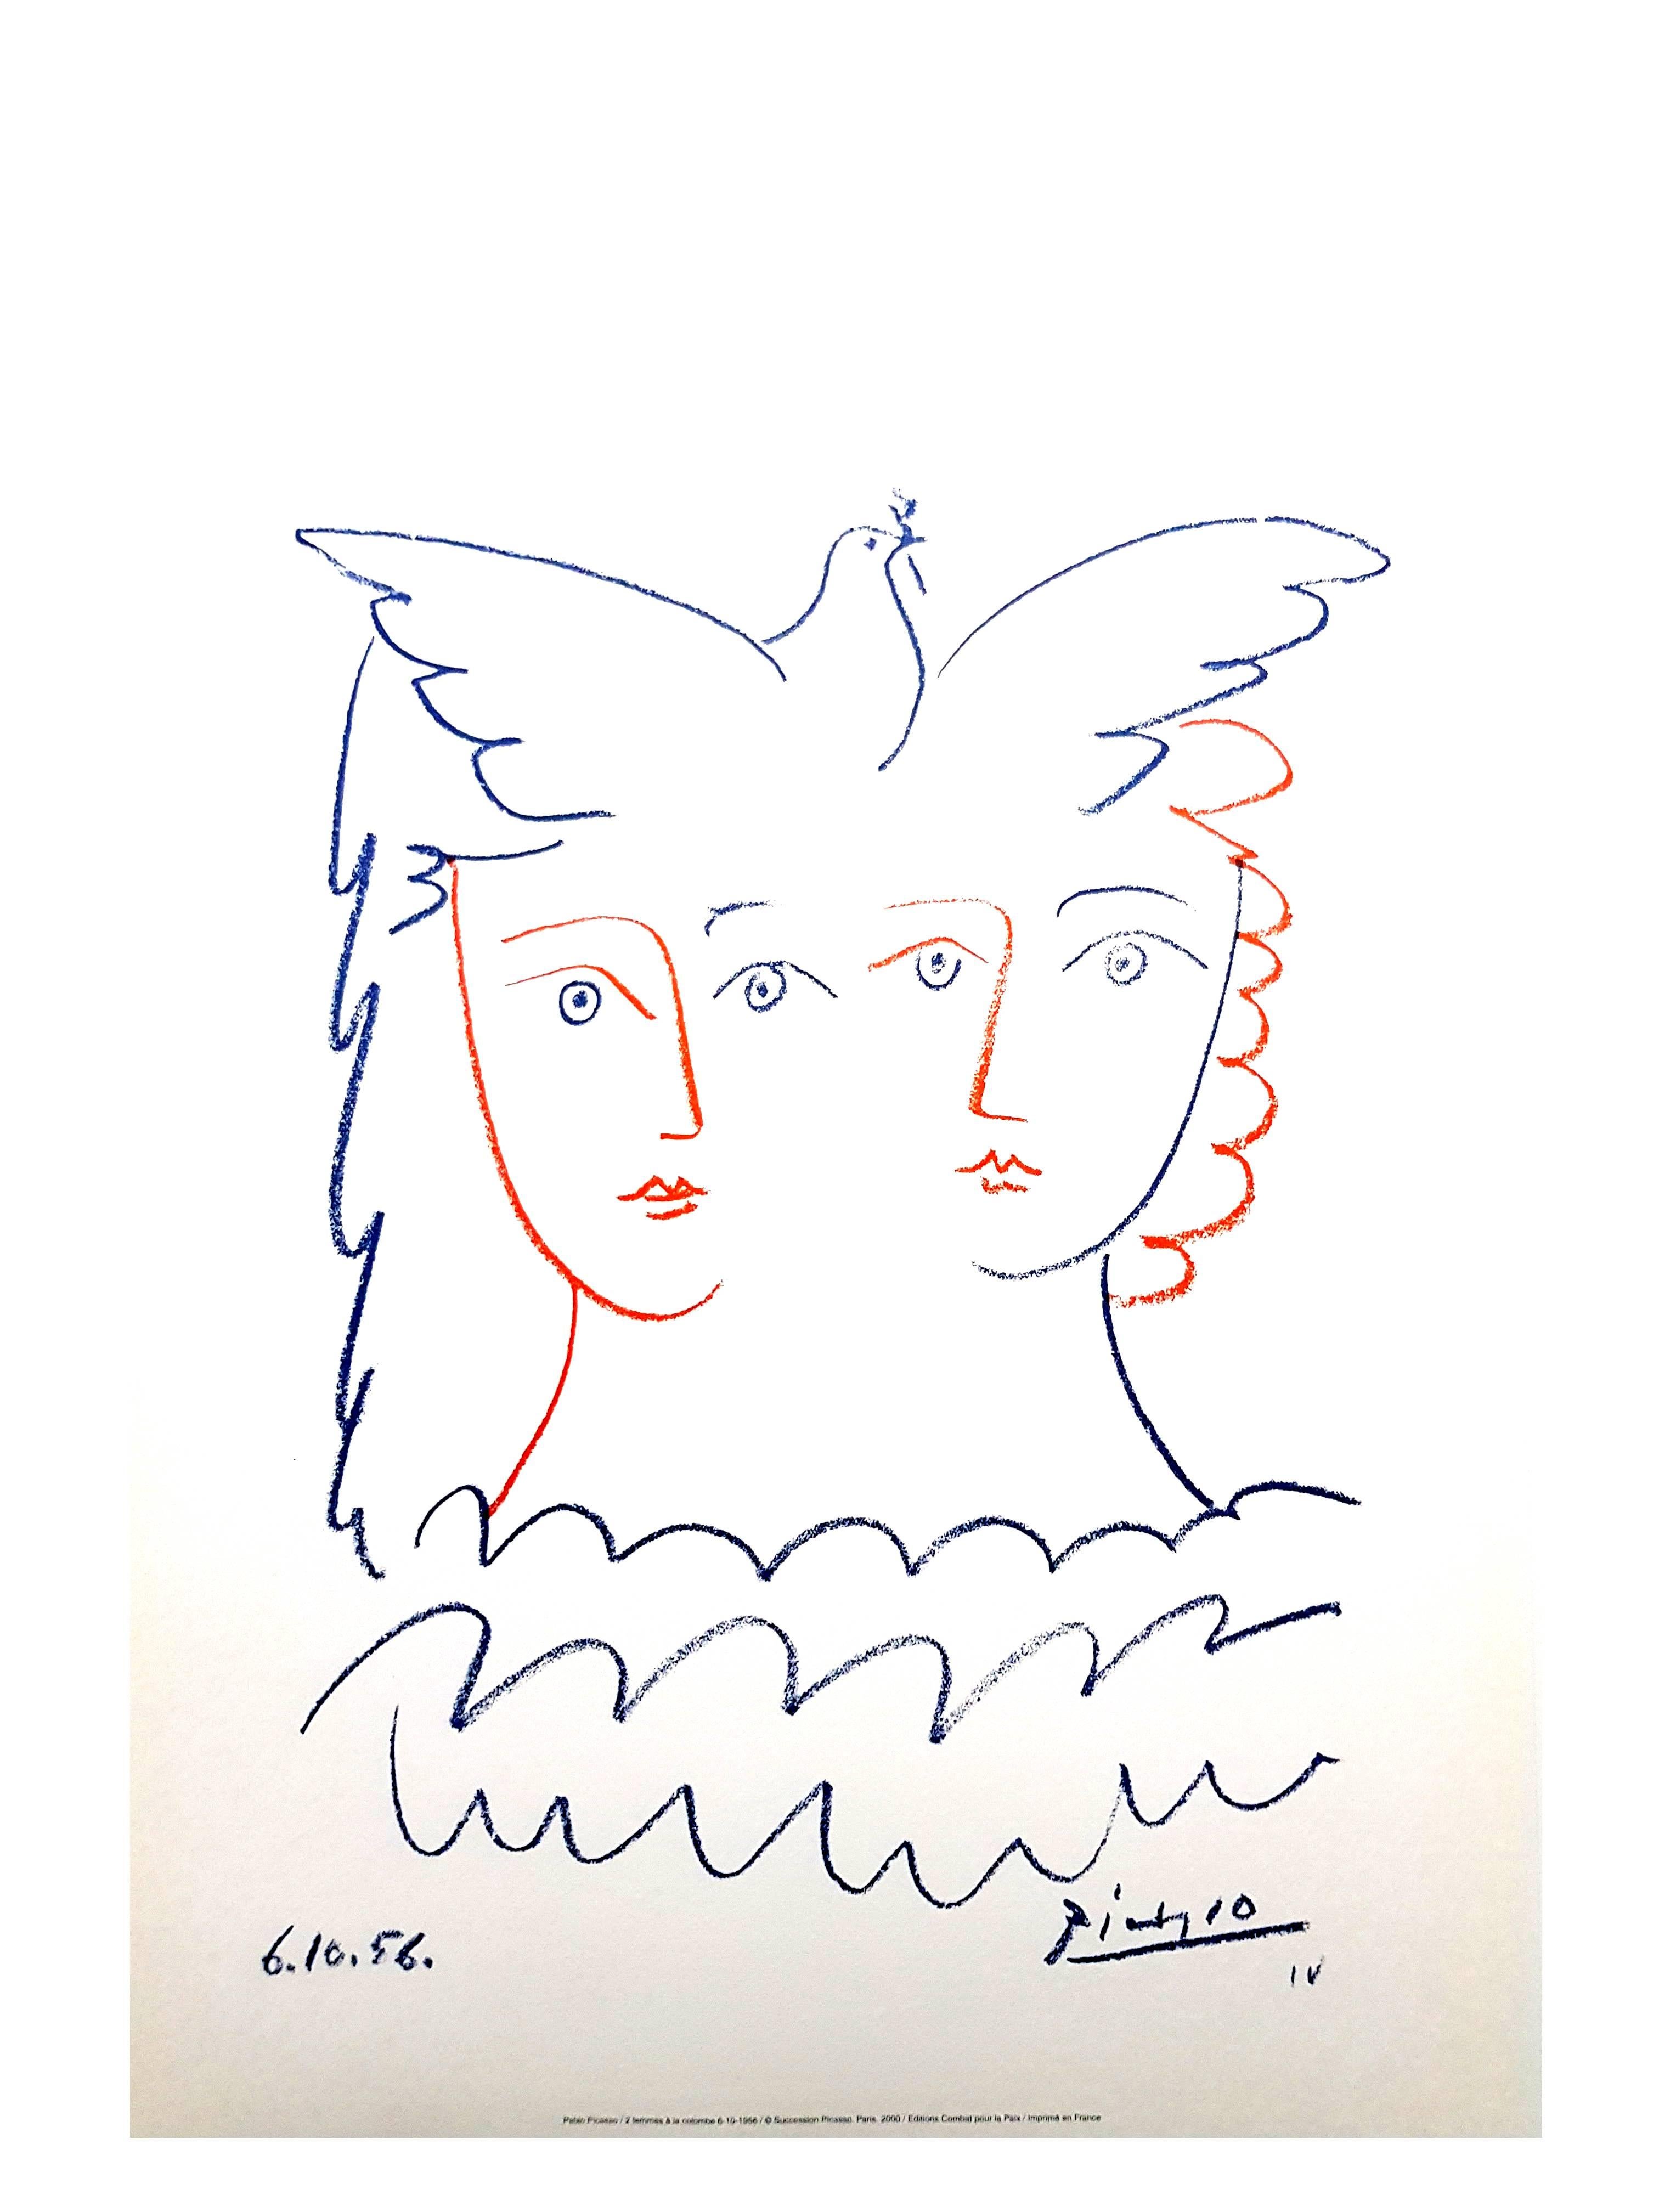 After PABLO PICASSO (1881-1973)
Women and Dove
Dimensions: 50 x 40 cm
Signed and dated in the plate
Edition Succession Picasso, Paris.
Editions de la Paix